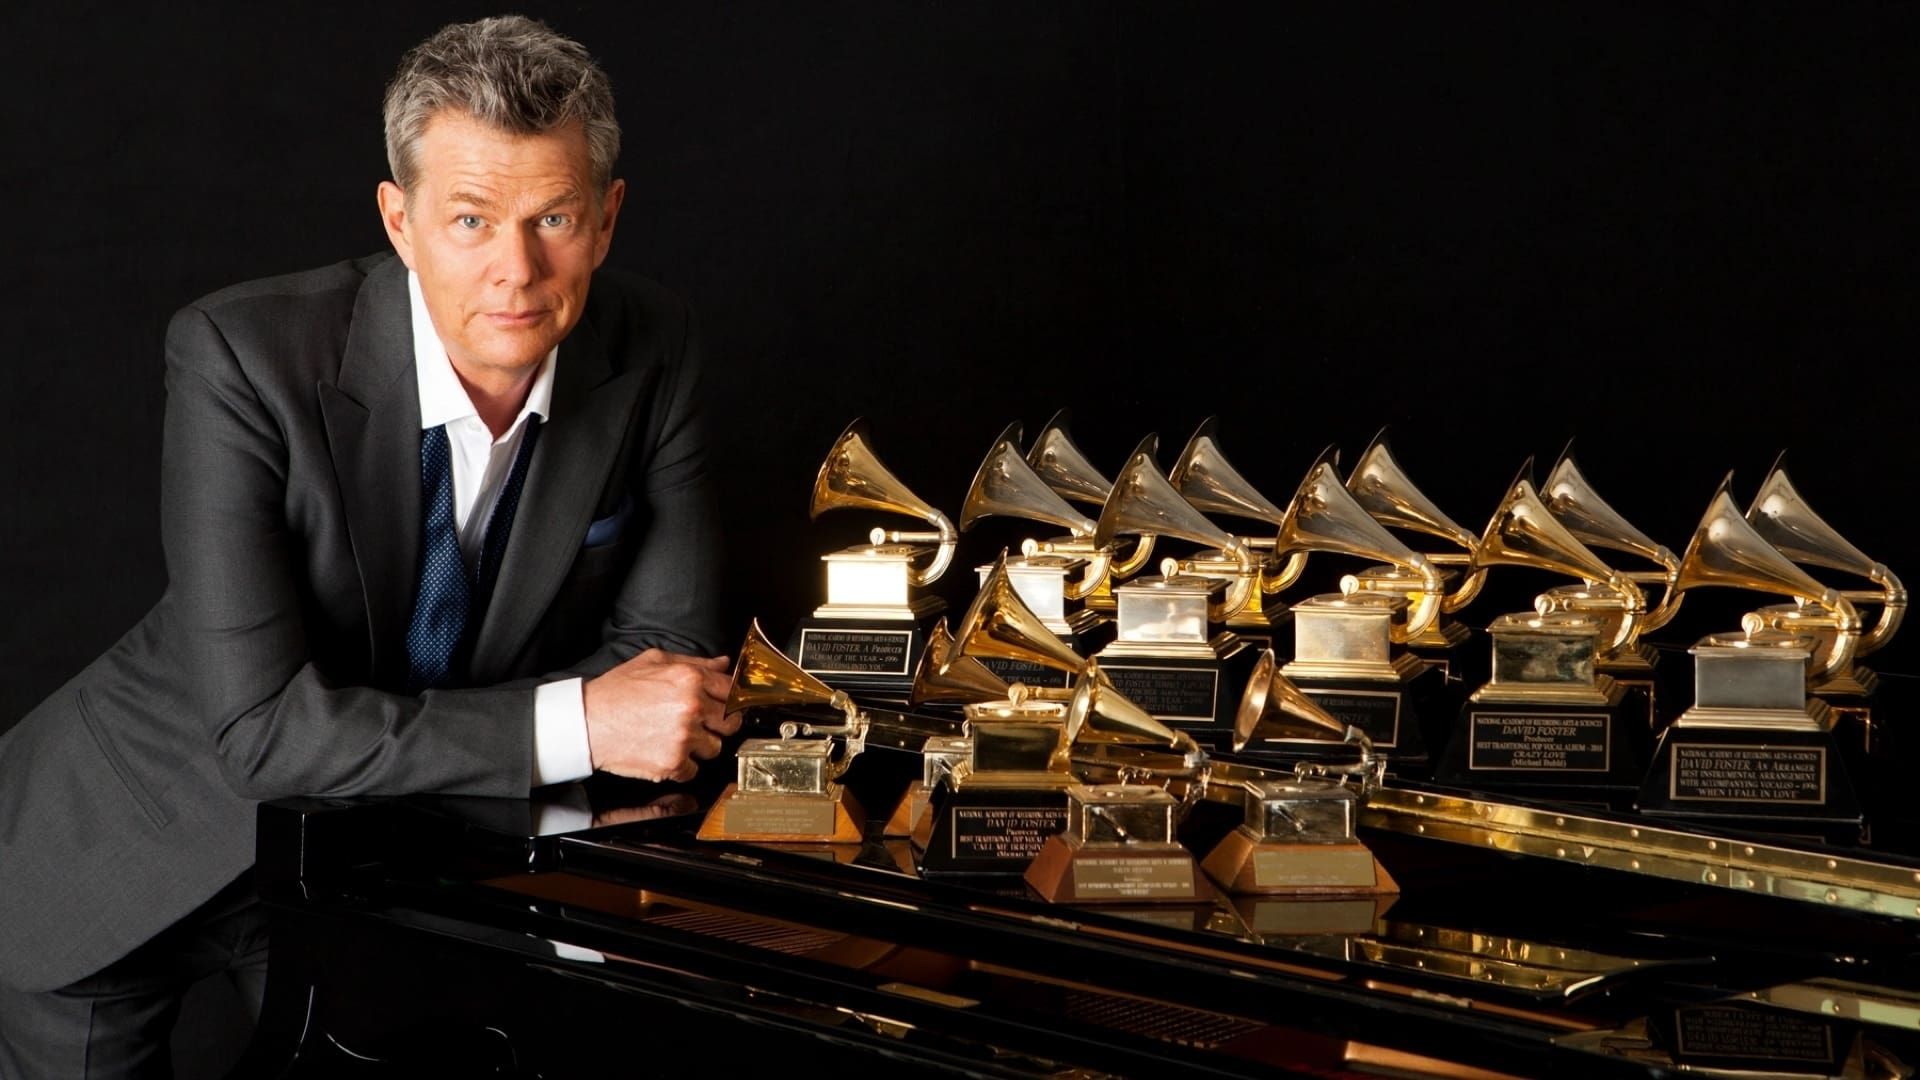 David Foster: Off the Record background